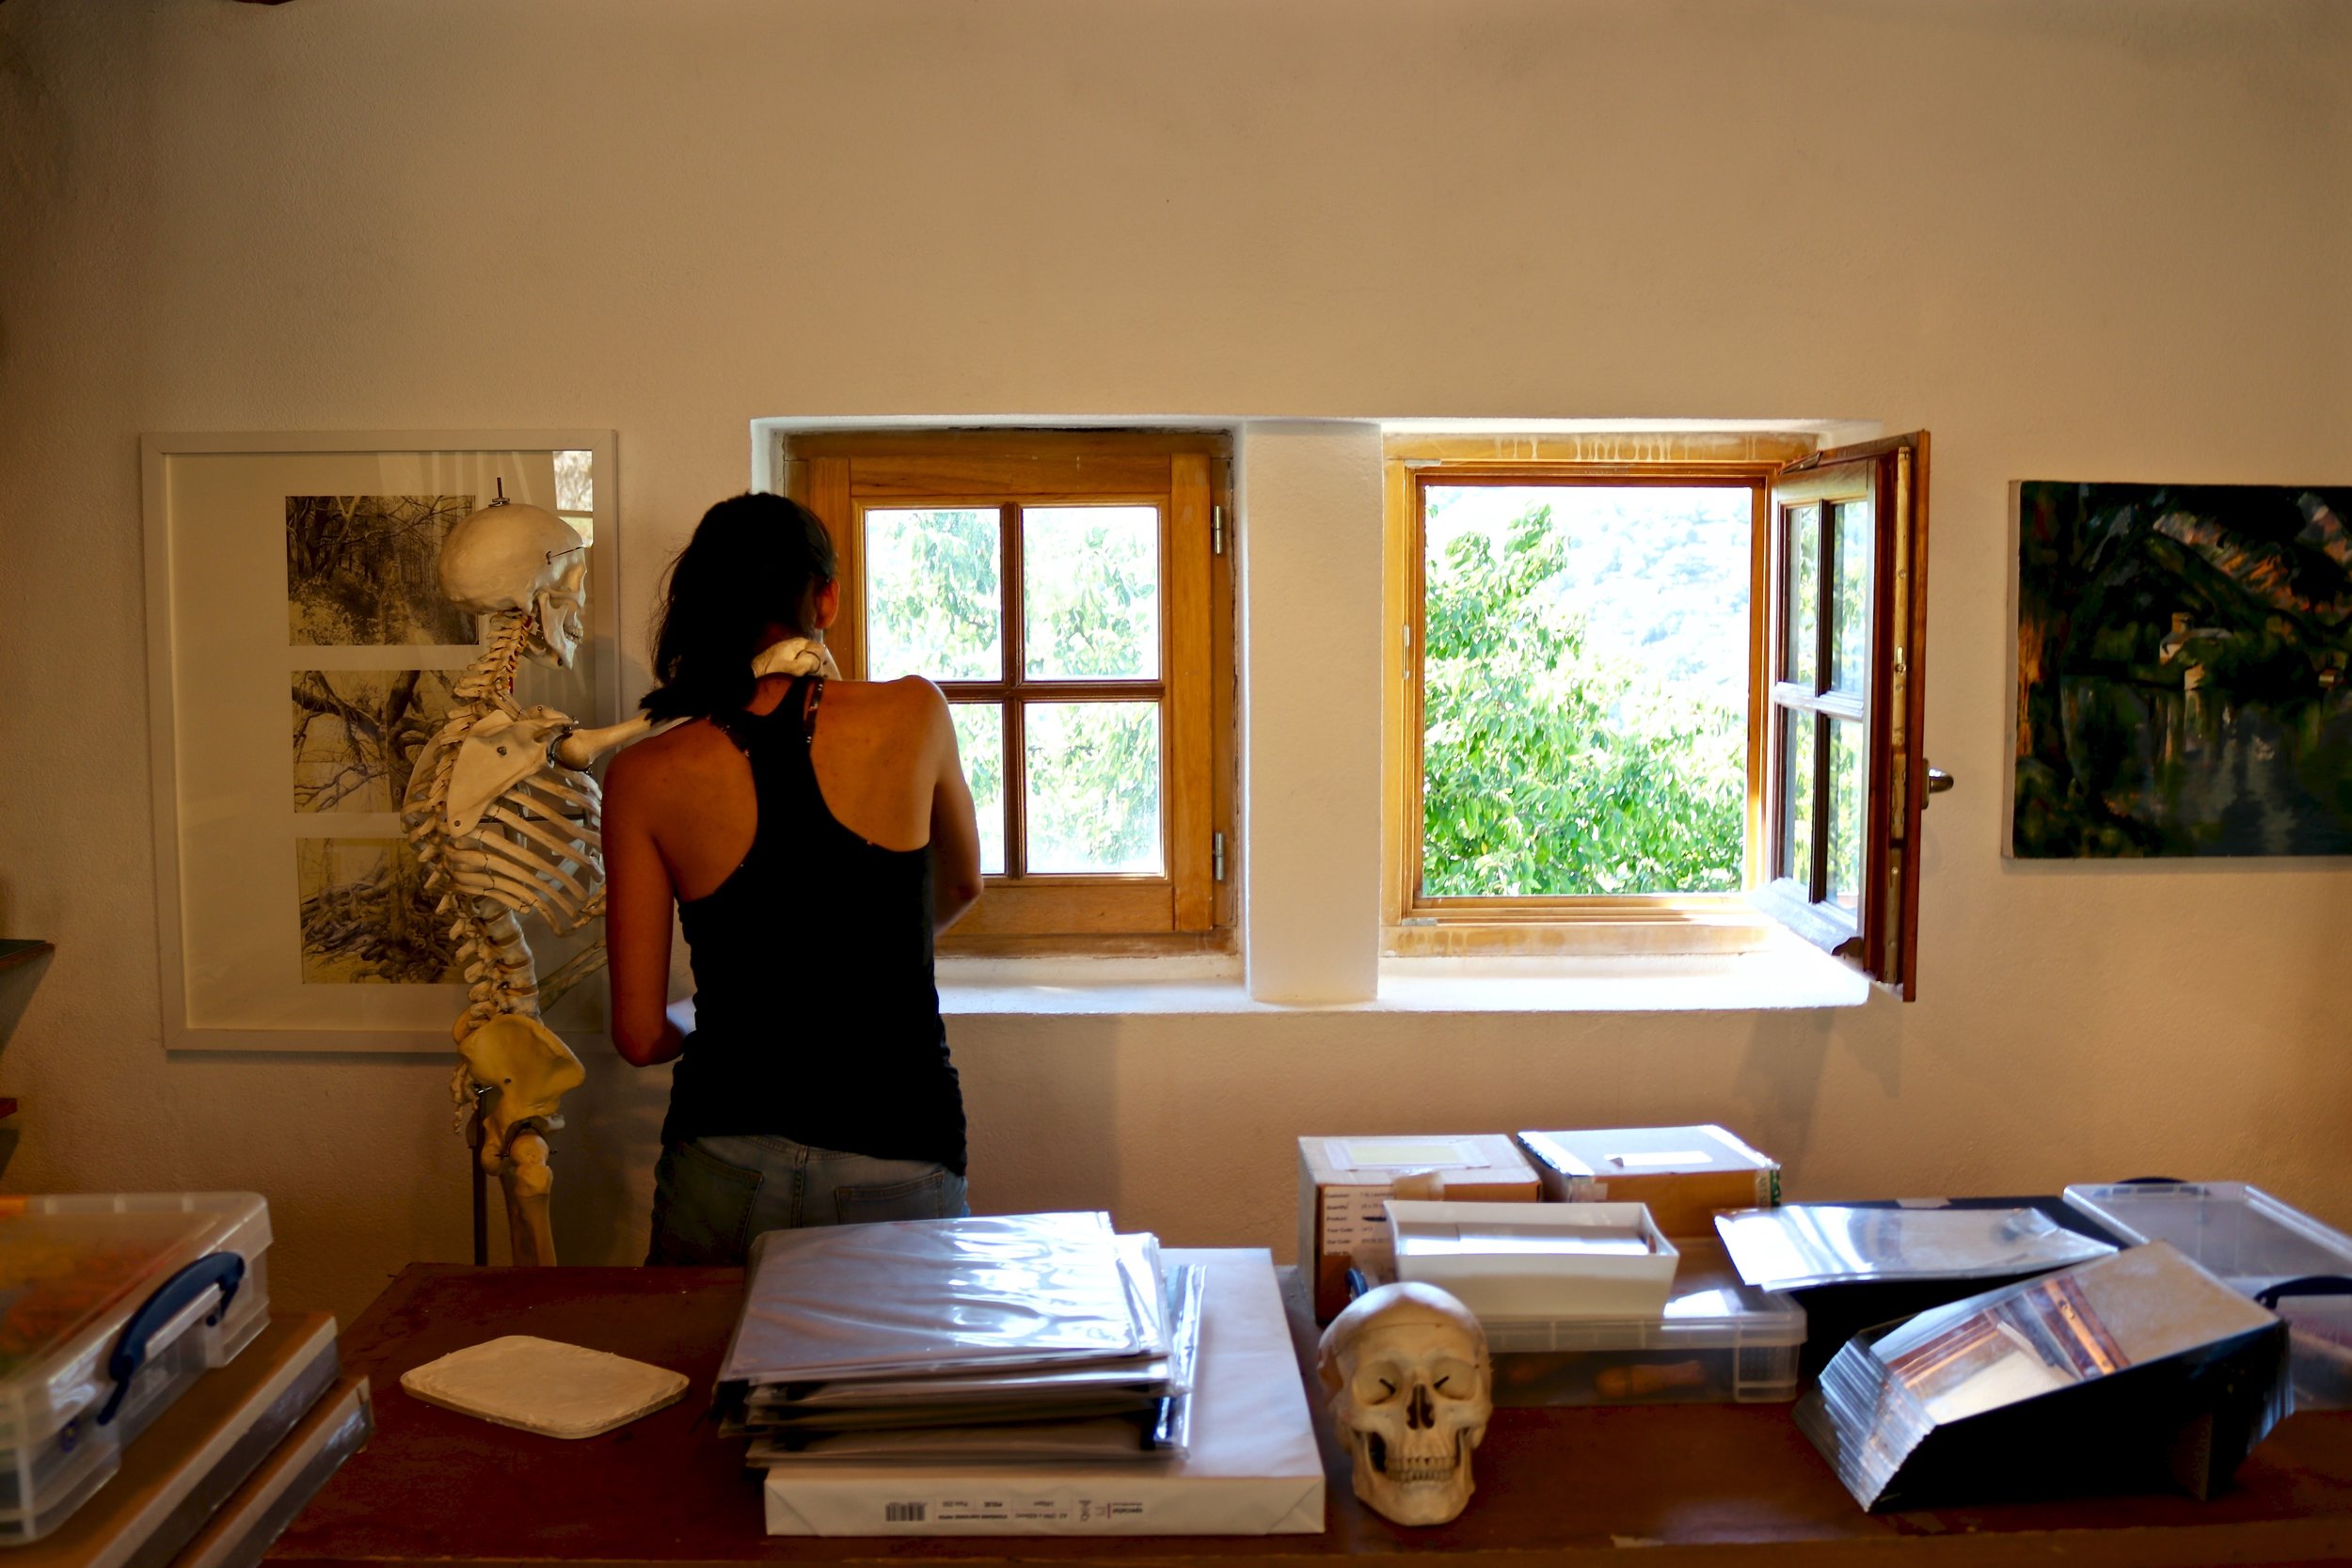  Some touch-ups to the walls have been added to lighten the rooms up. Here's Camila getting a helping hand from our resident skeleton. 